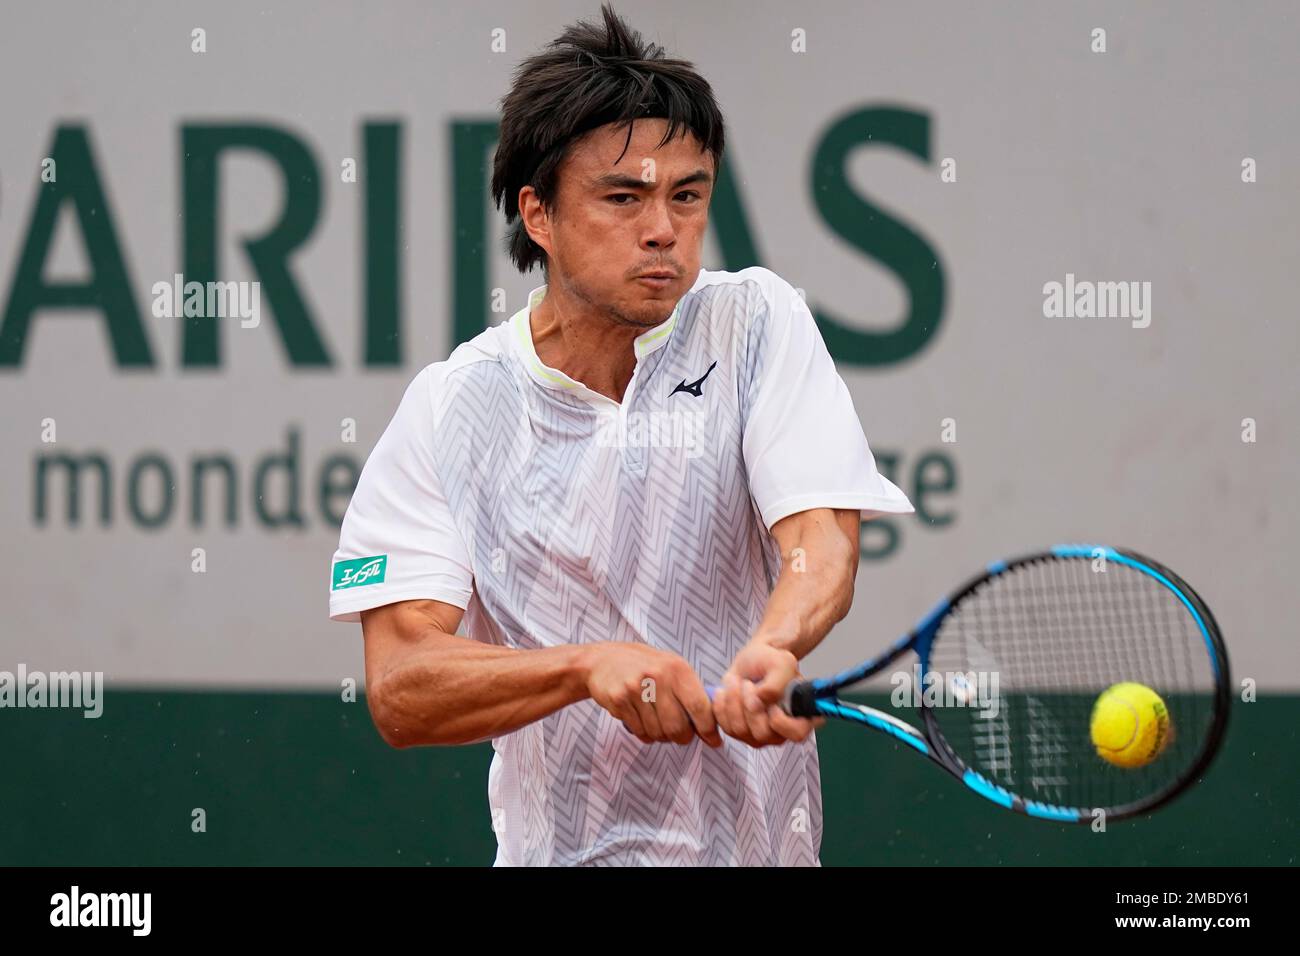 Japan's Taro Daniel plays a shot against France's Gregoire Barrere during  their first round match at the French Open tennis tournament in Roland  Garros stadium in Paris, France, Sunday, May 22, 2022. (